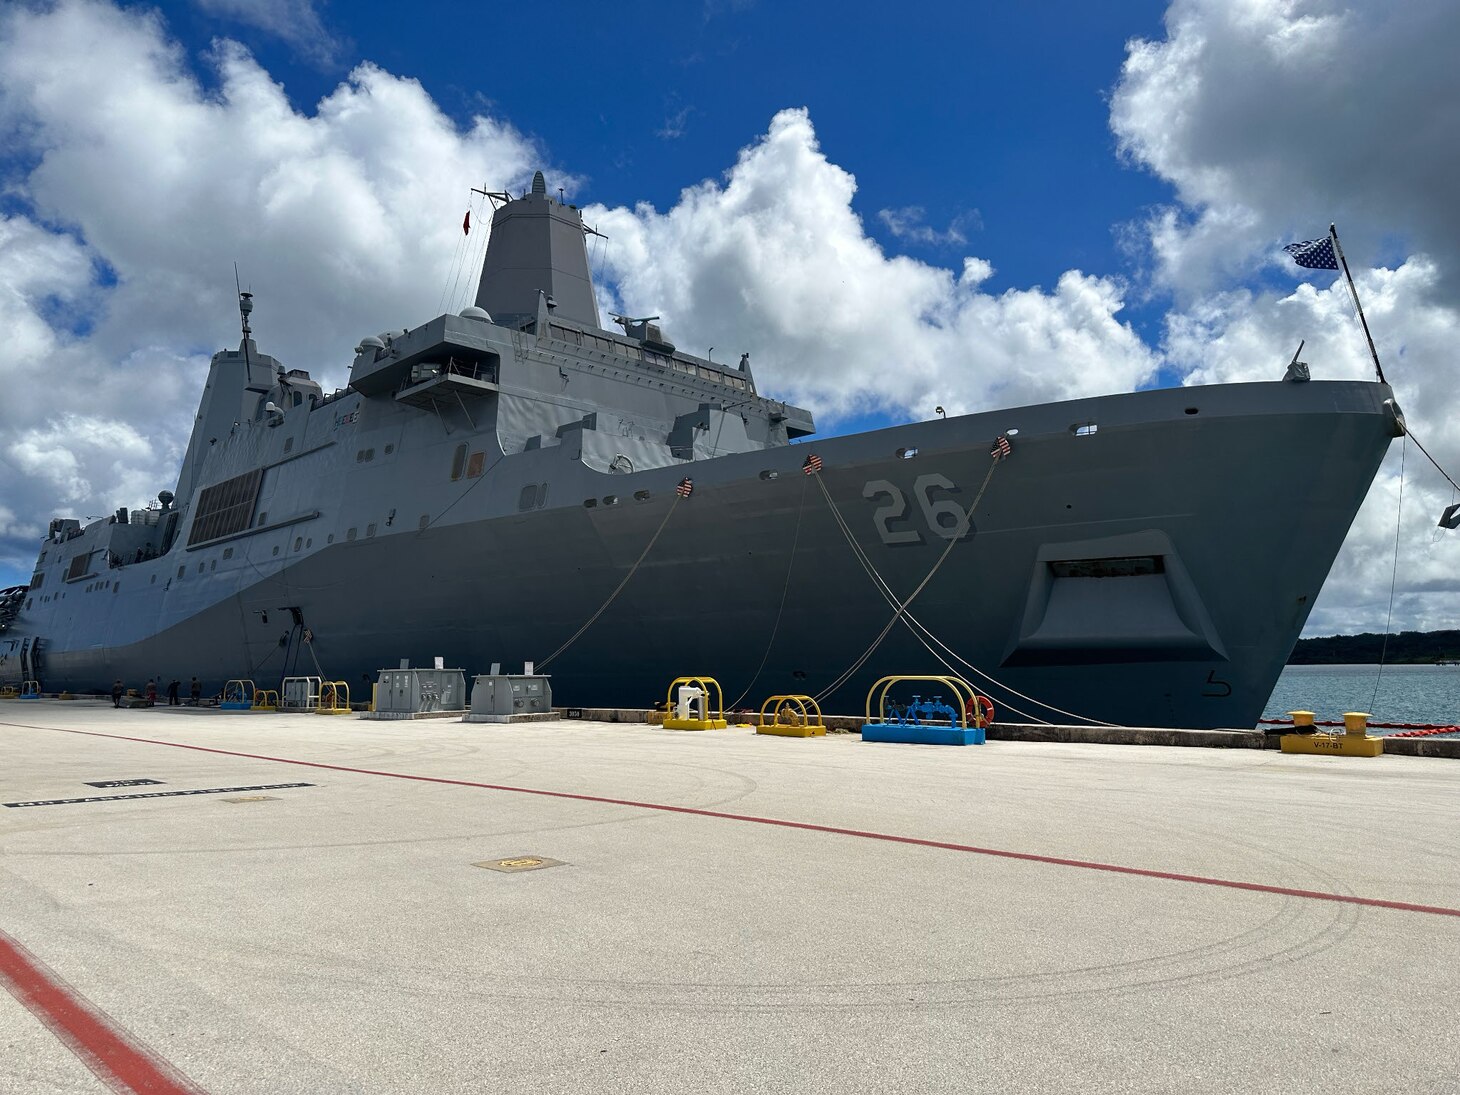 Amphibious transport dock ship USS John P. Murtha (LPD 26) sits moored to the pier at U.S. Naval Base Guam for a regular scheduled port visit. While in port, the Makin Island Amphibious Ready Group (ARG), comprised of amphibious assault ship USS Makin Island (LHD 8) and amphibious transport docks USS Anchorage (LPD 23) and John P. Murtha, refueled, took on supplies, and had the chance to explore the local area.